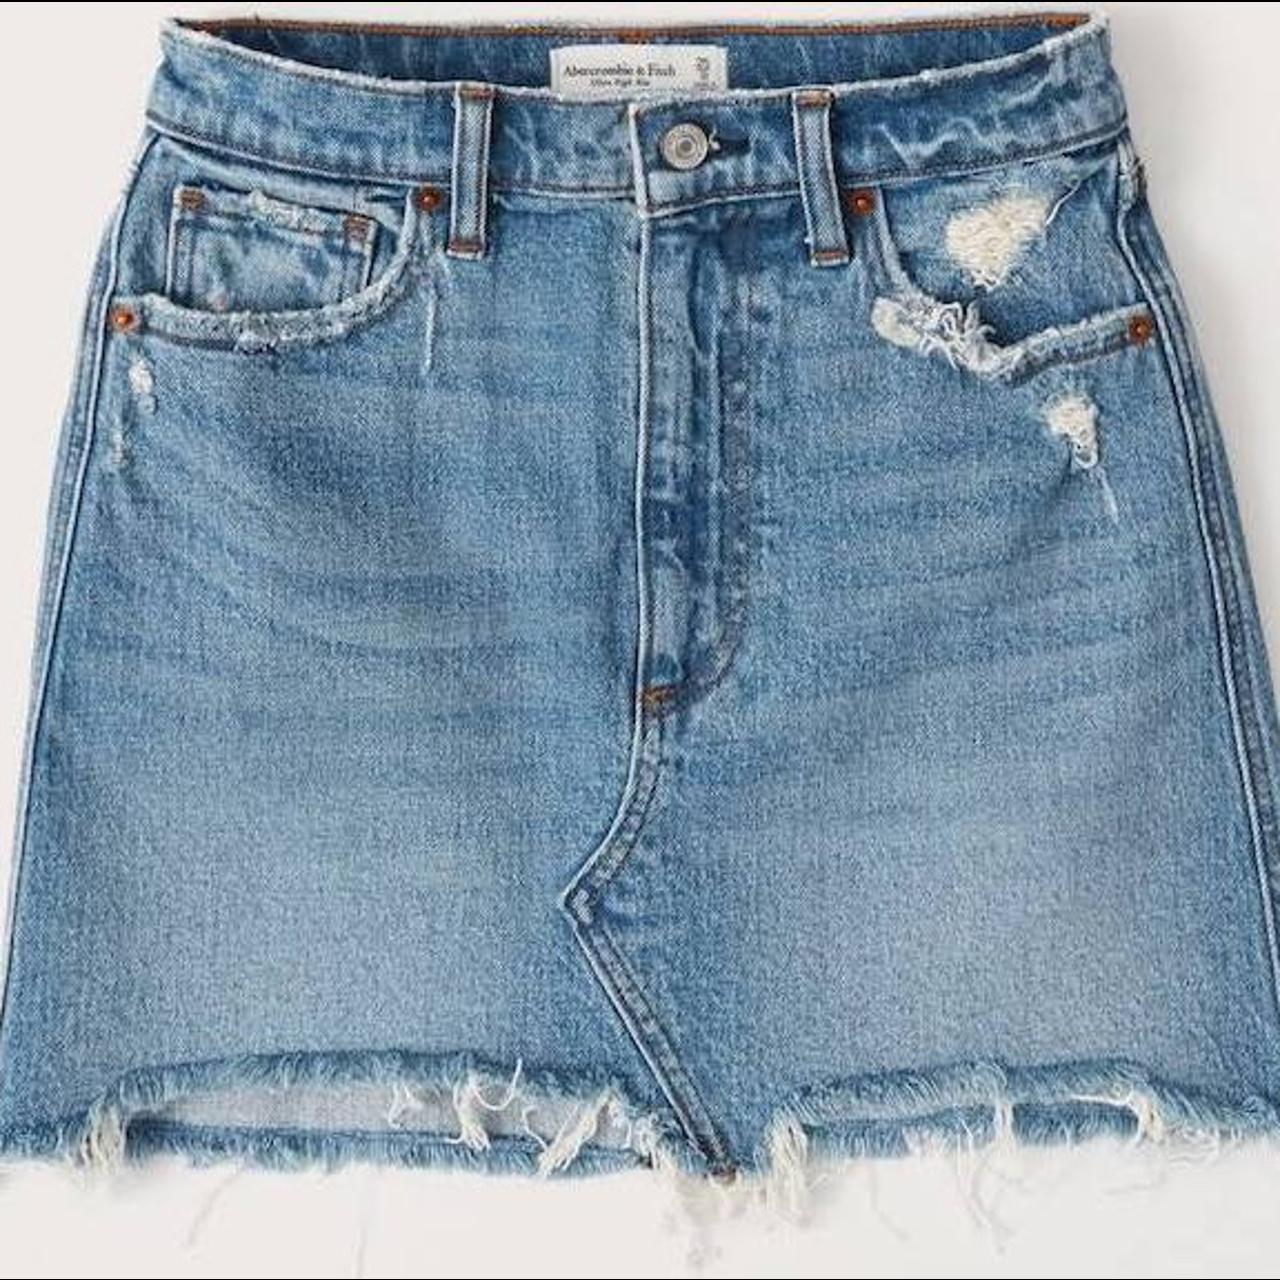 Abercrombie & Fitch Women's Blue Skirt (2)